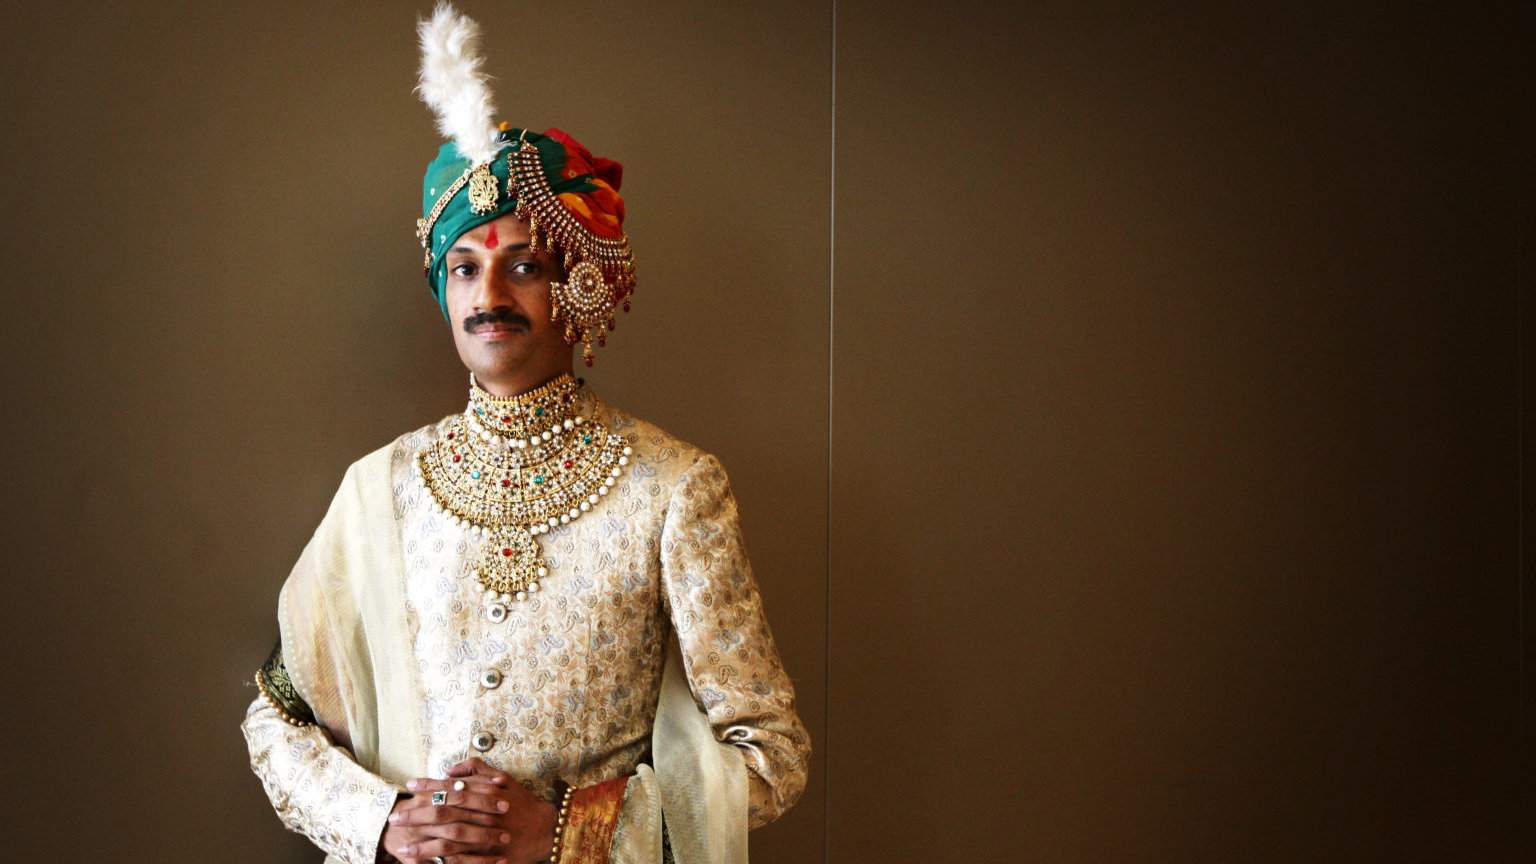 Prince Manvendra Singh Gohil is India's first openly gay Prince and we got to interview him!